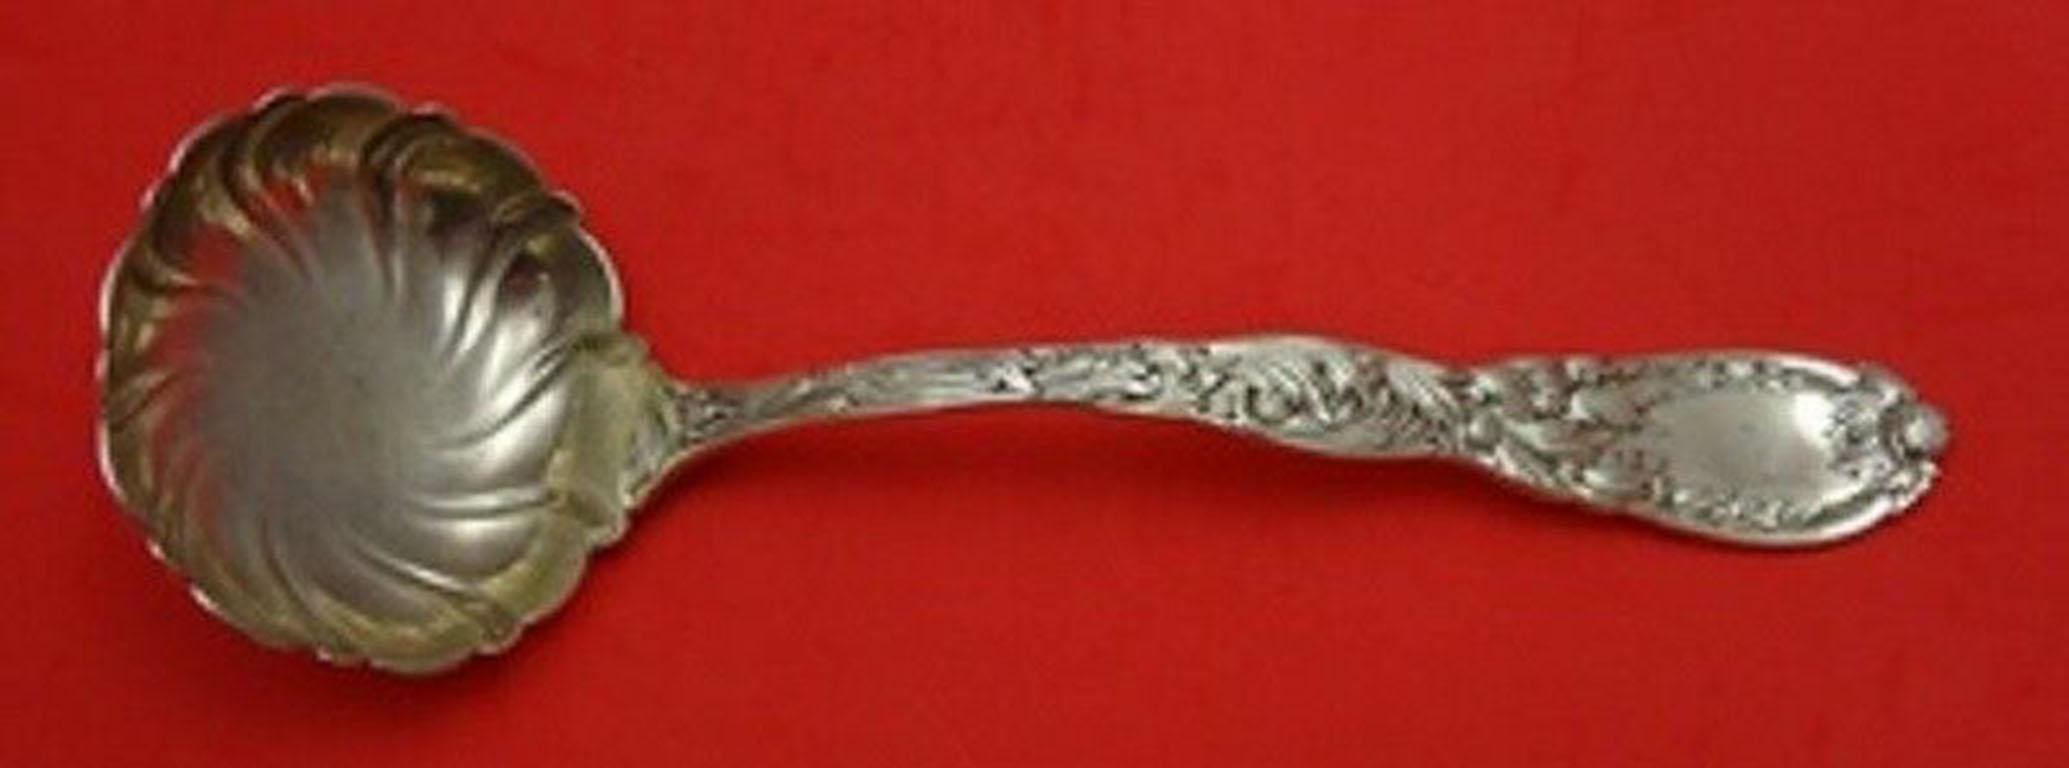 Chrysanthemum by Tiffany & Co. Sterling Silver Oyster Ladle 2